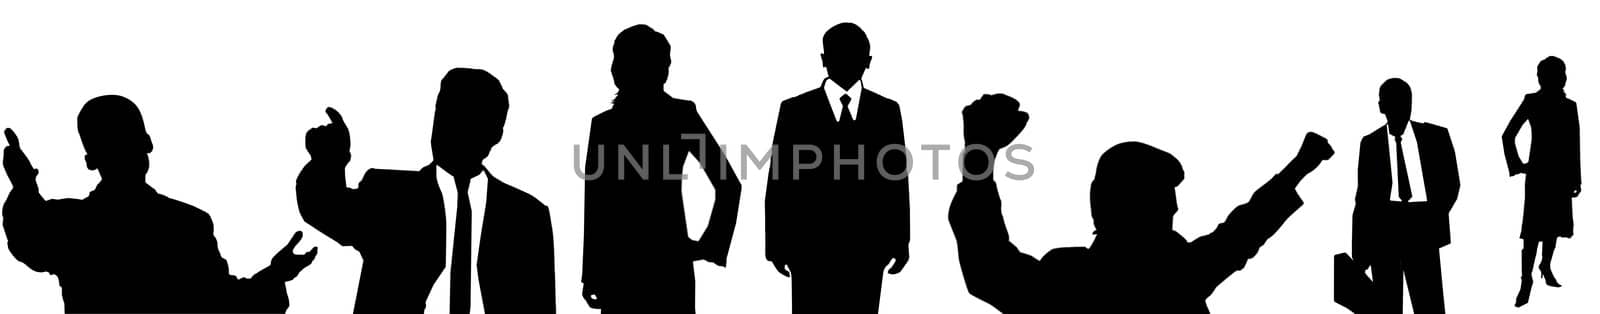 An image of silhouettes of managers